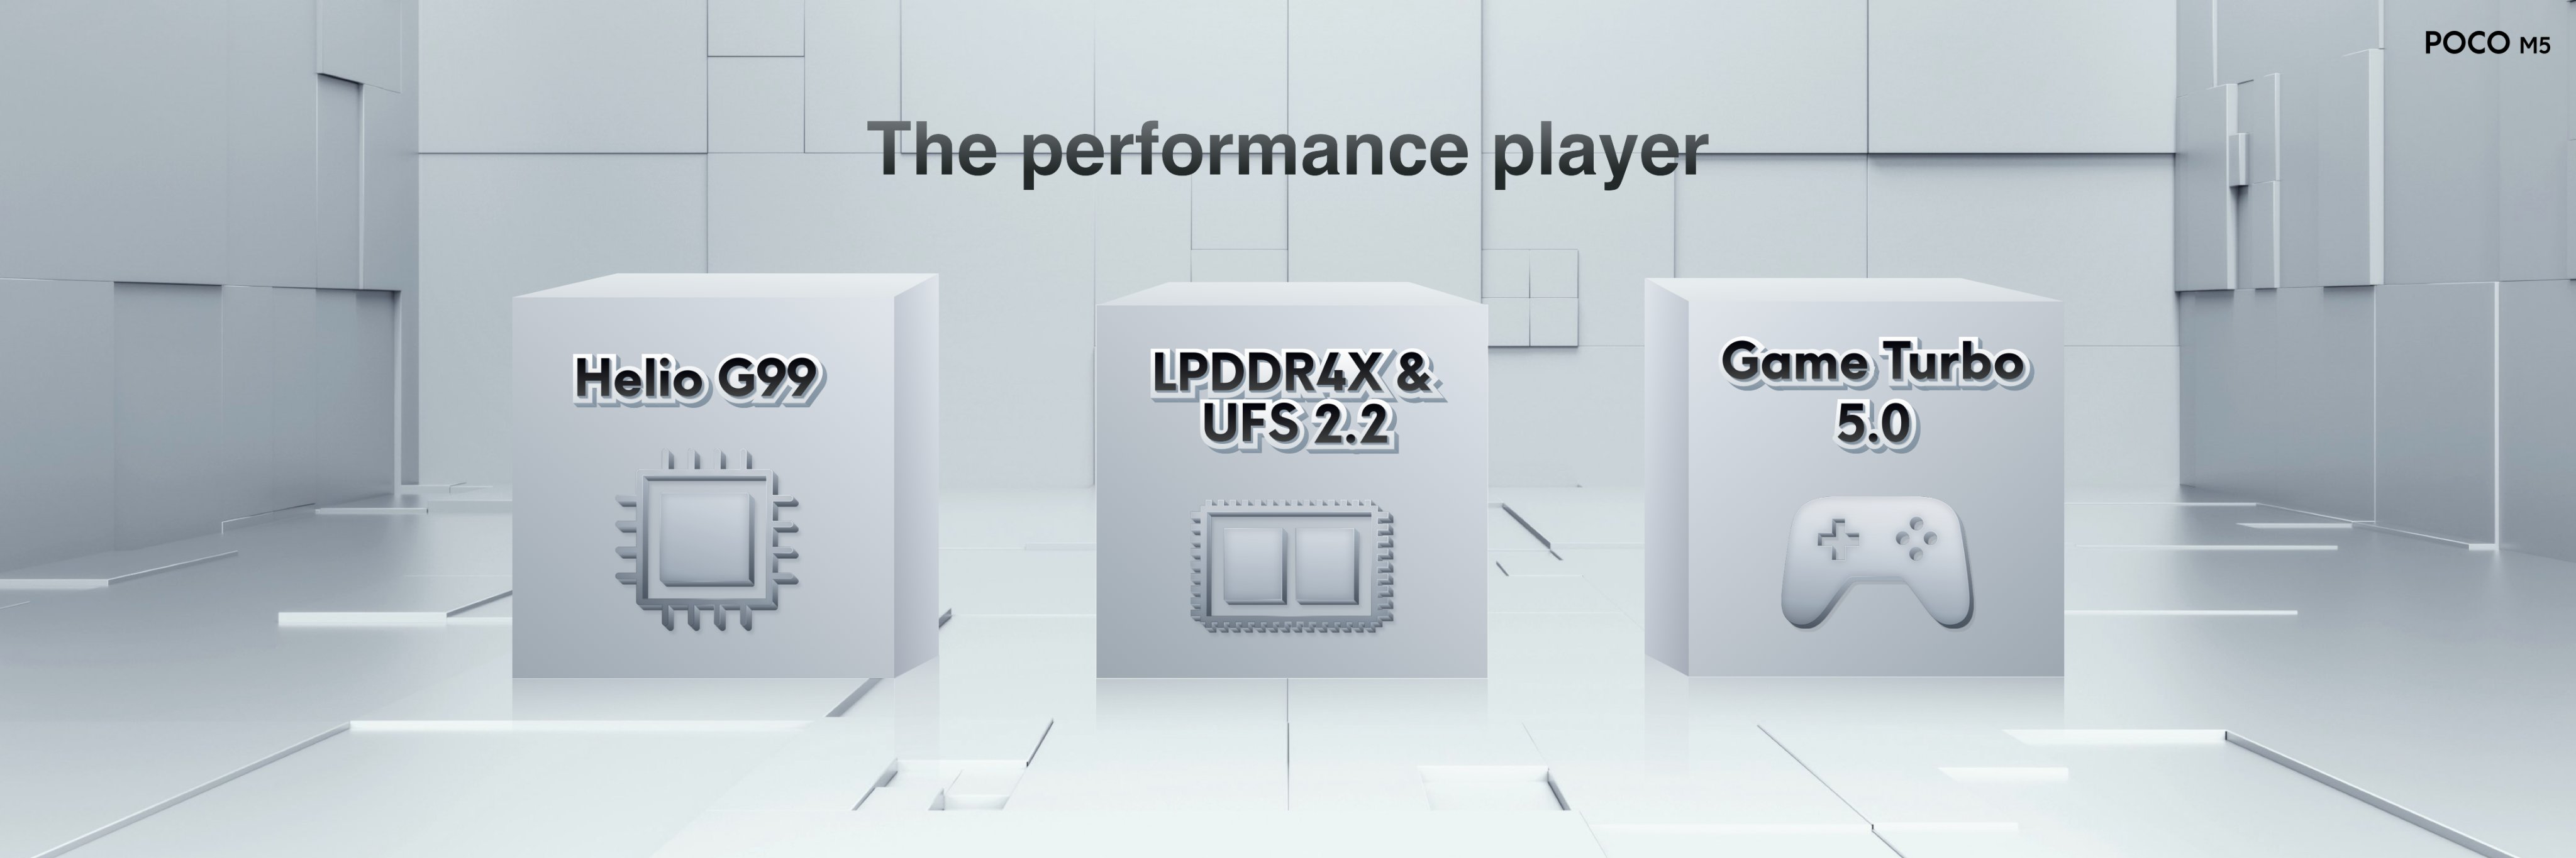 POCO on X: 💪The #POCOM5 will feature one of the most powerful 4G chipset  in 2022: the MediaTek Helio G99. It's paired with LPDDR4X and UFS 2.2  scored a total AnTuTu of